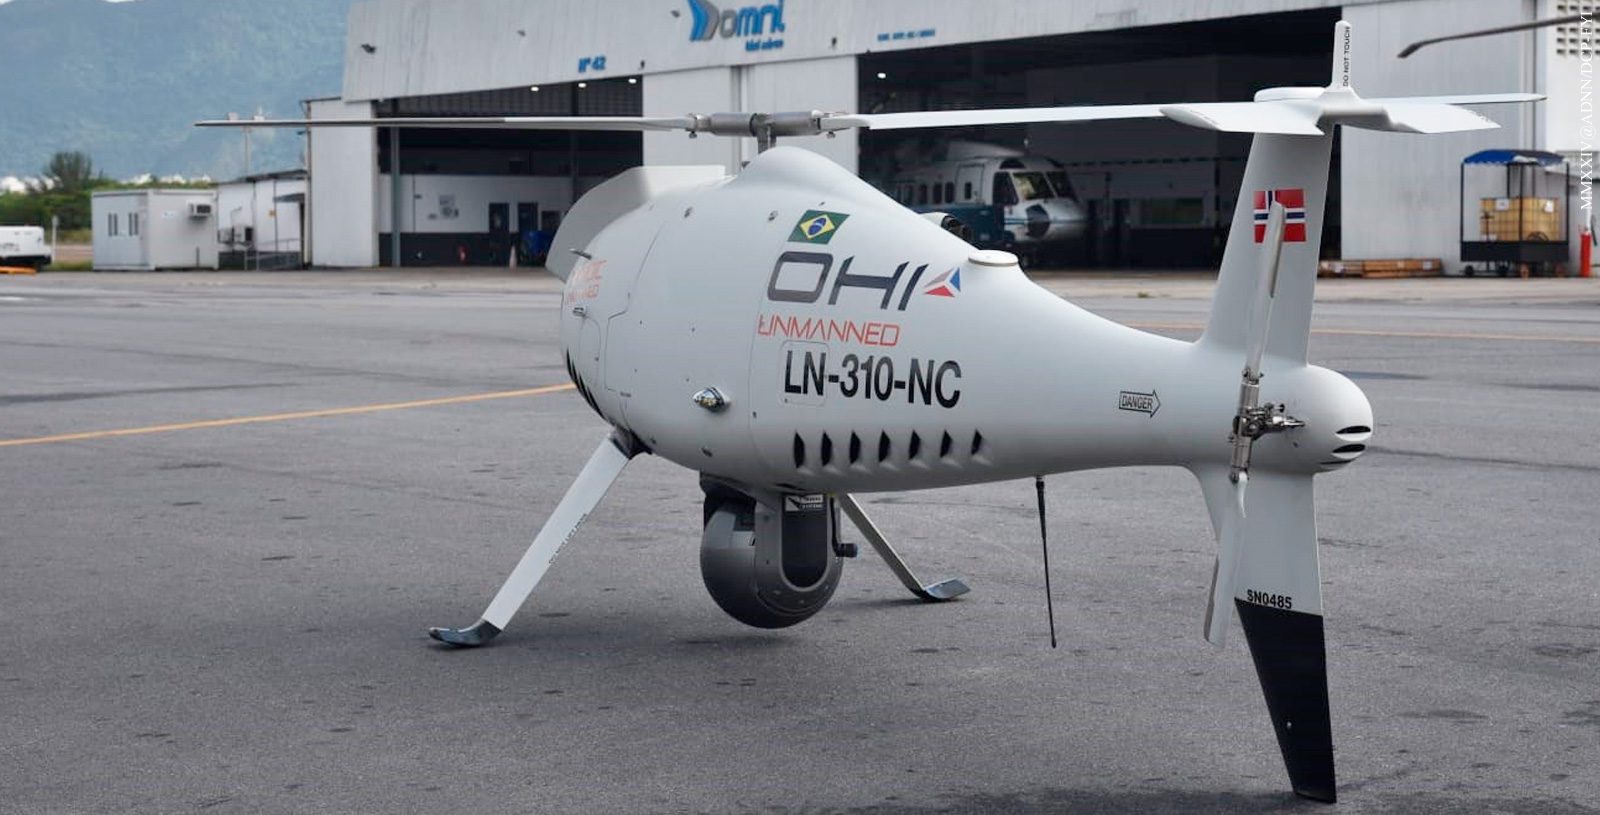 The first unmanned long-range offshore missions in Brazil will be carried out by Omni Táxi Aéreo of the OHI group